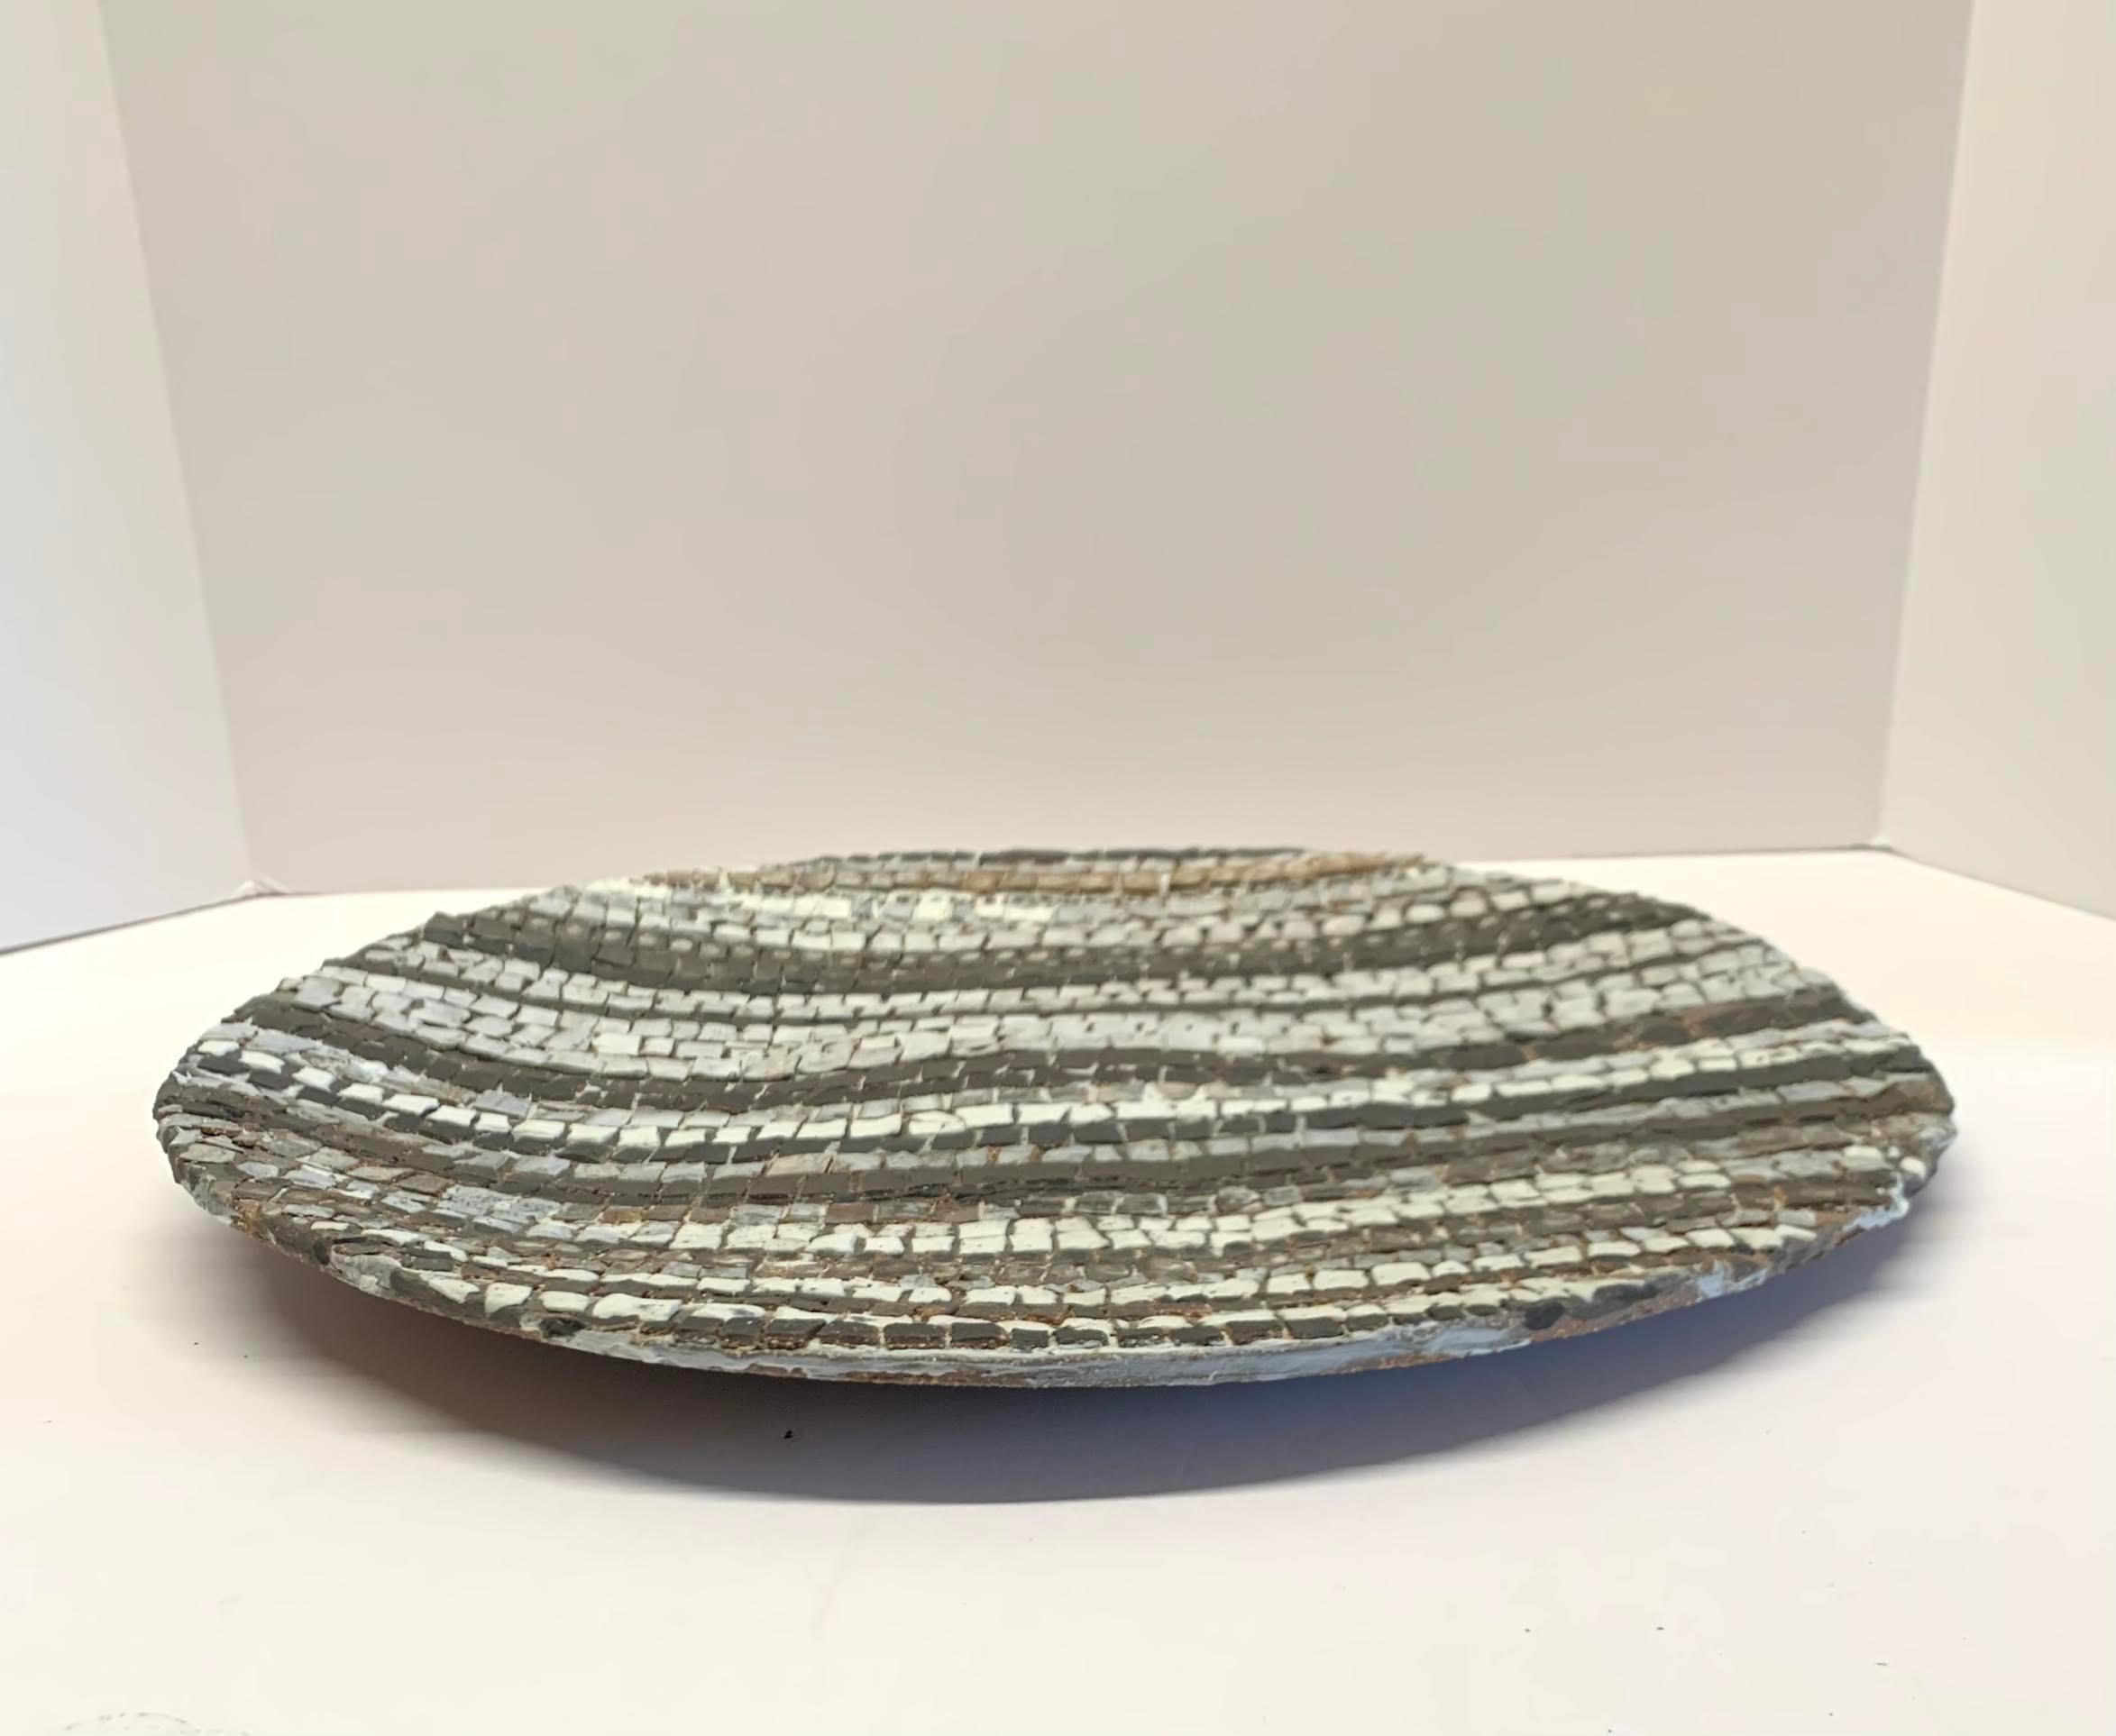 American Black, White, Taupe Hand Made Stoneware Plate by Ceramicist Brenda Holzke, USA